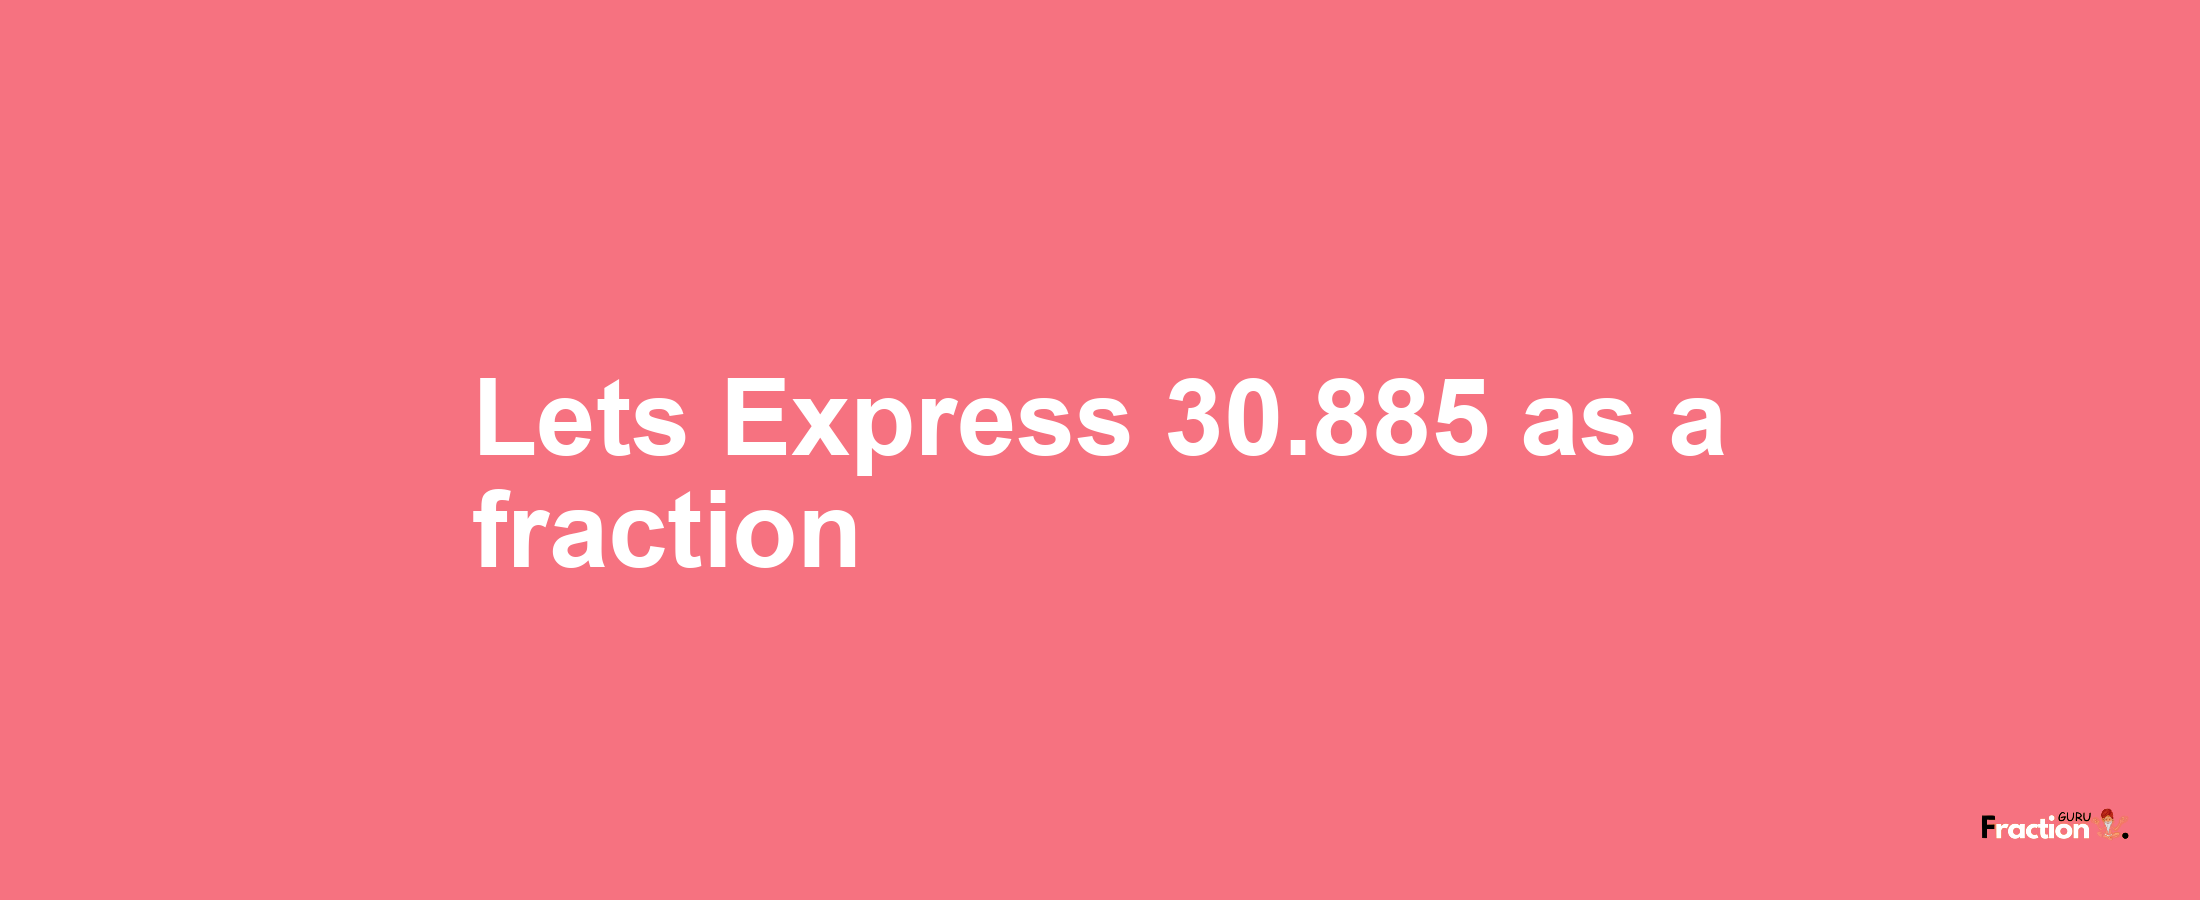 Lets Express 30.885 as afraction